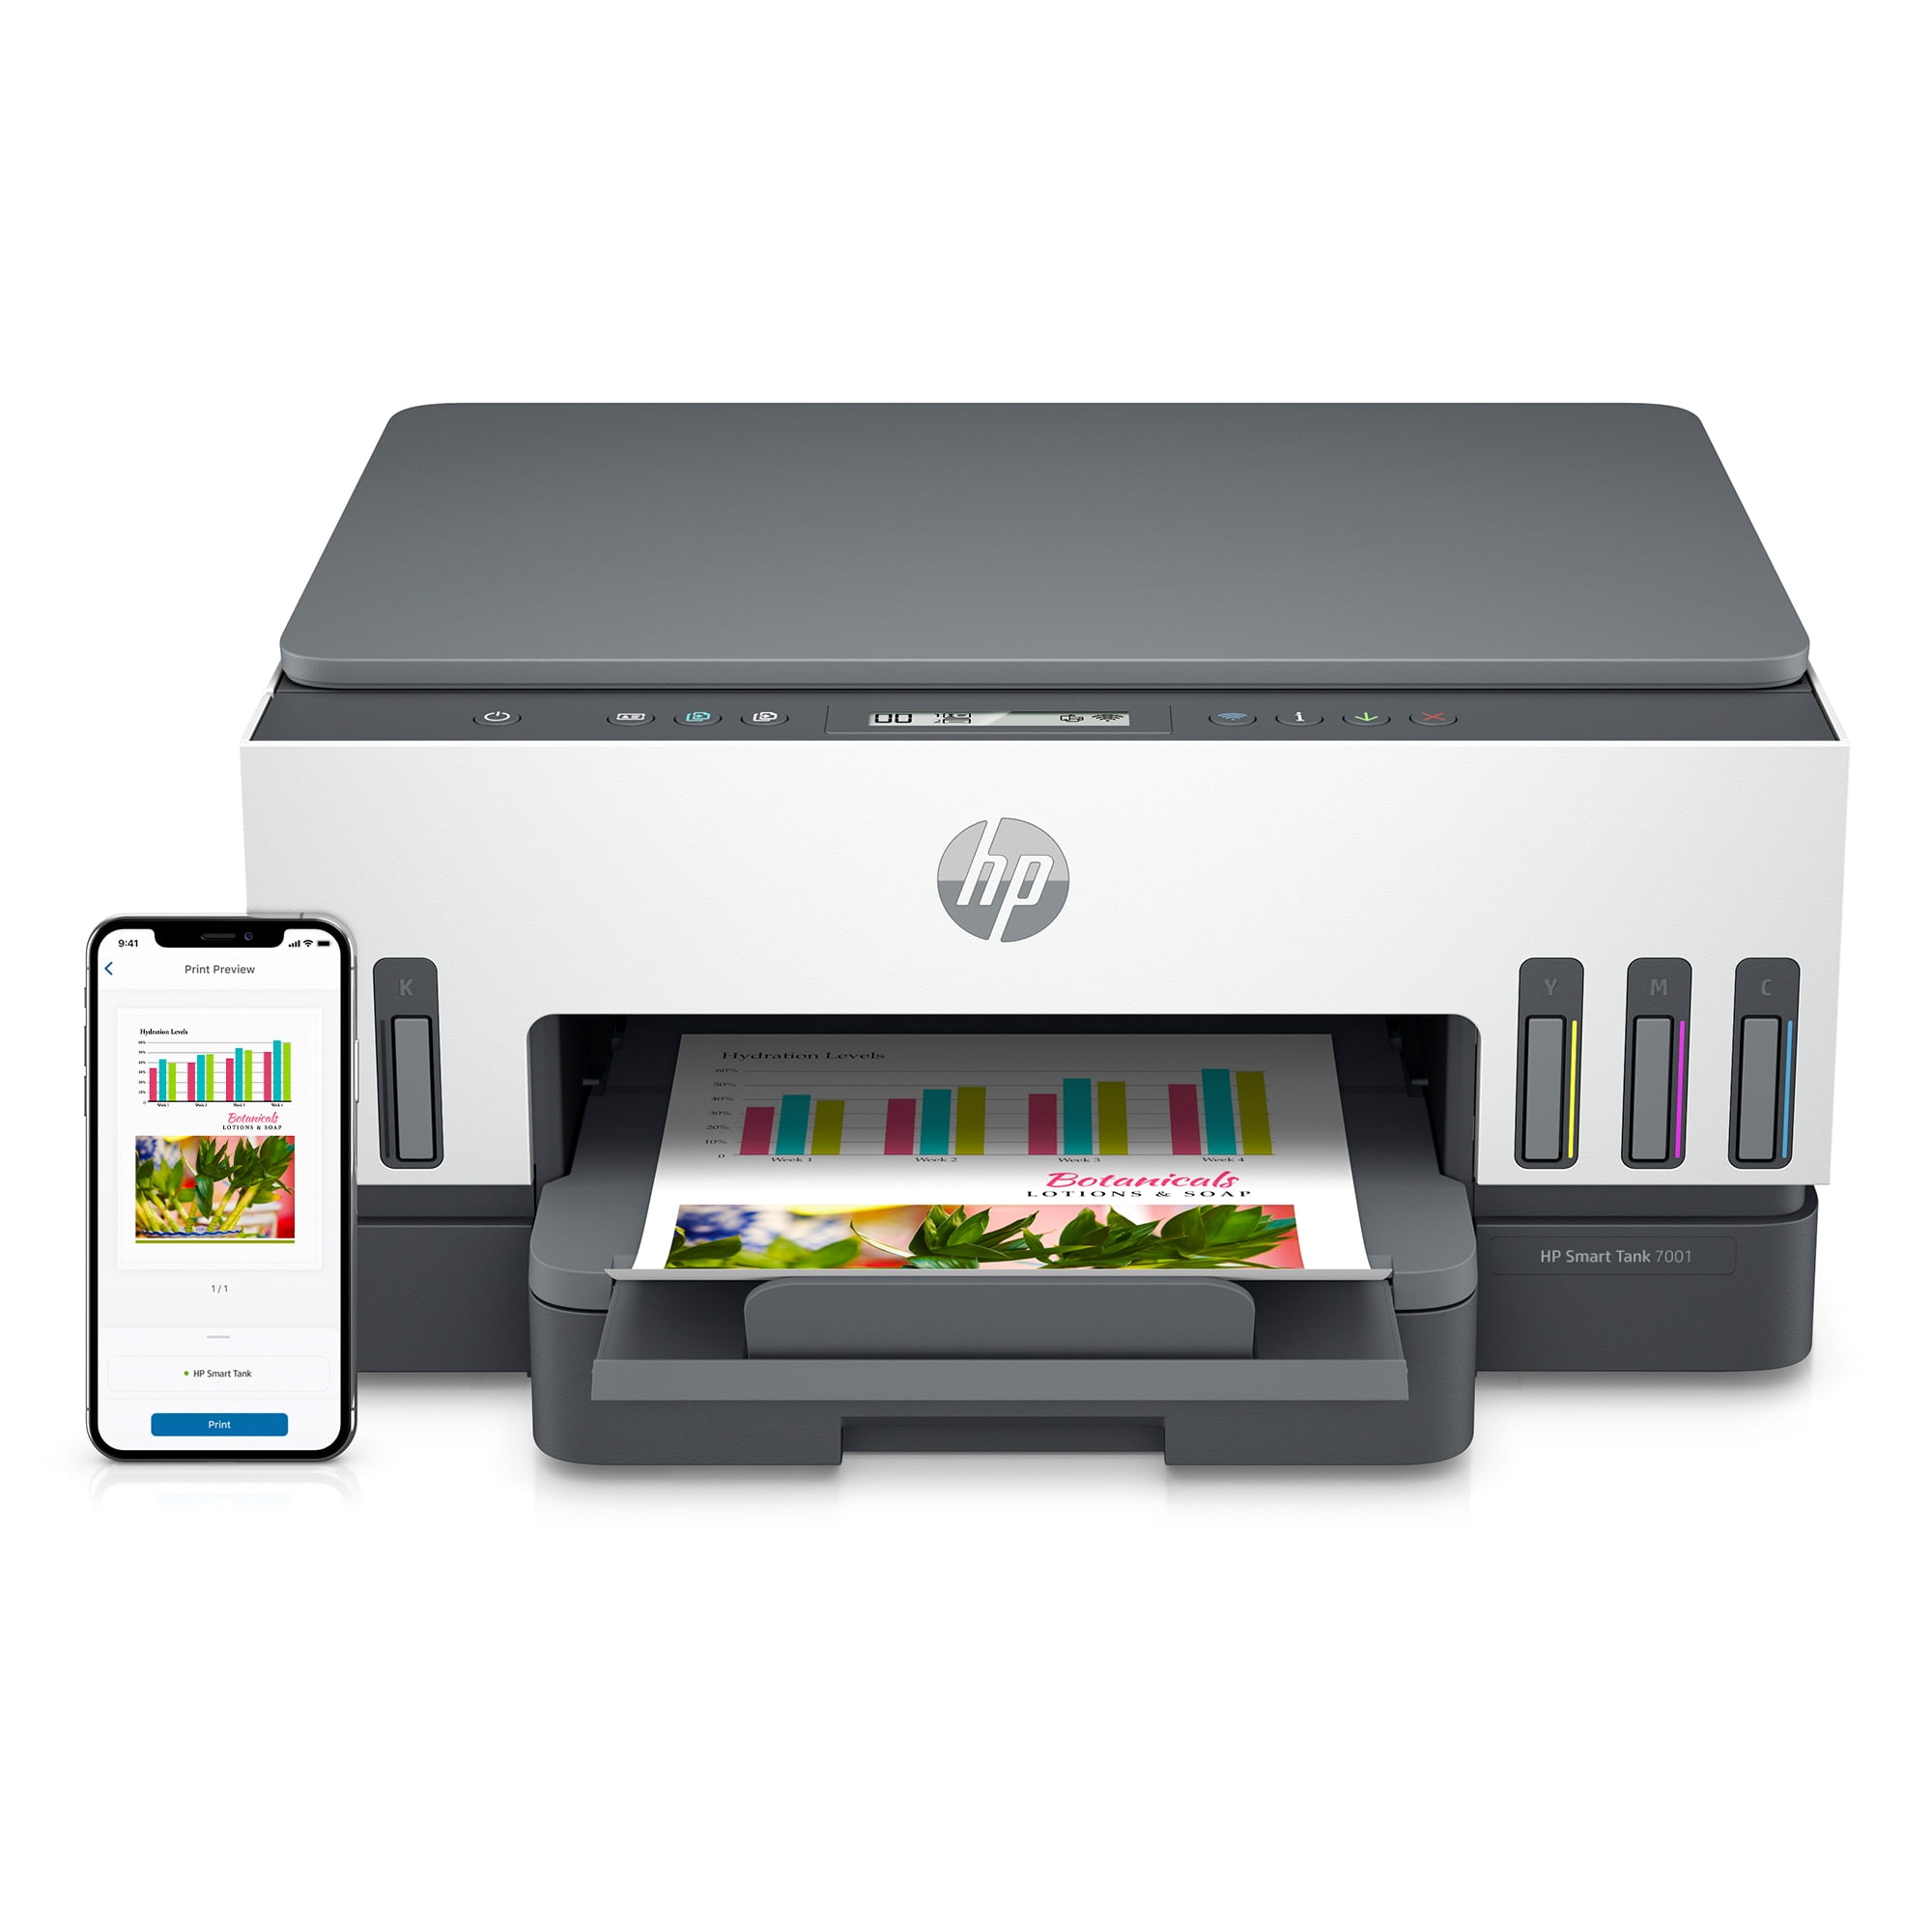 herberg Pijl munt HP Smart Tank 7001 Wireless All-in-One Cartridge-free Color Ink Tank Printer,  up to 2 Years of Ink Included - Walmart.com